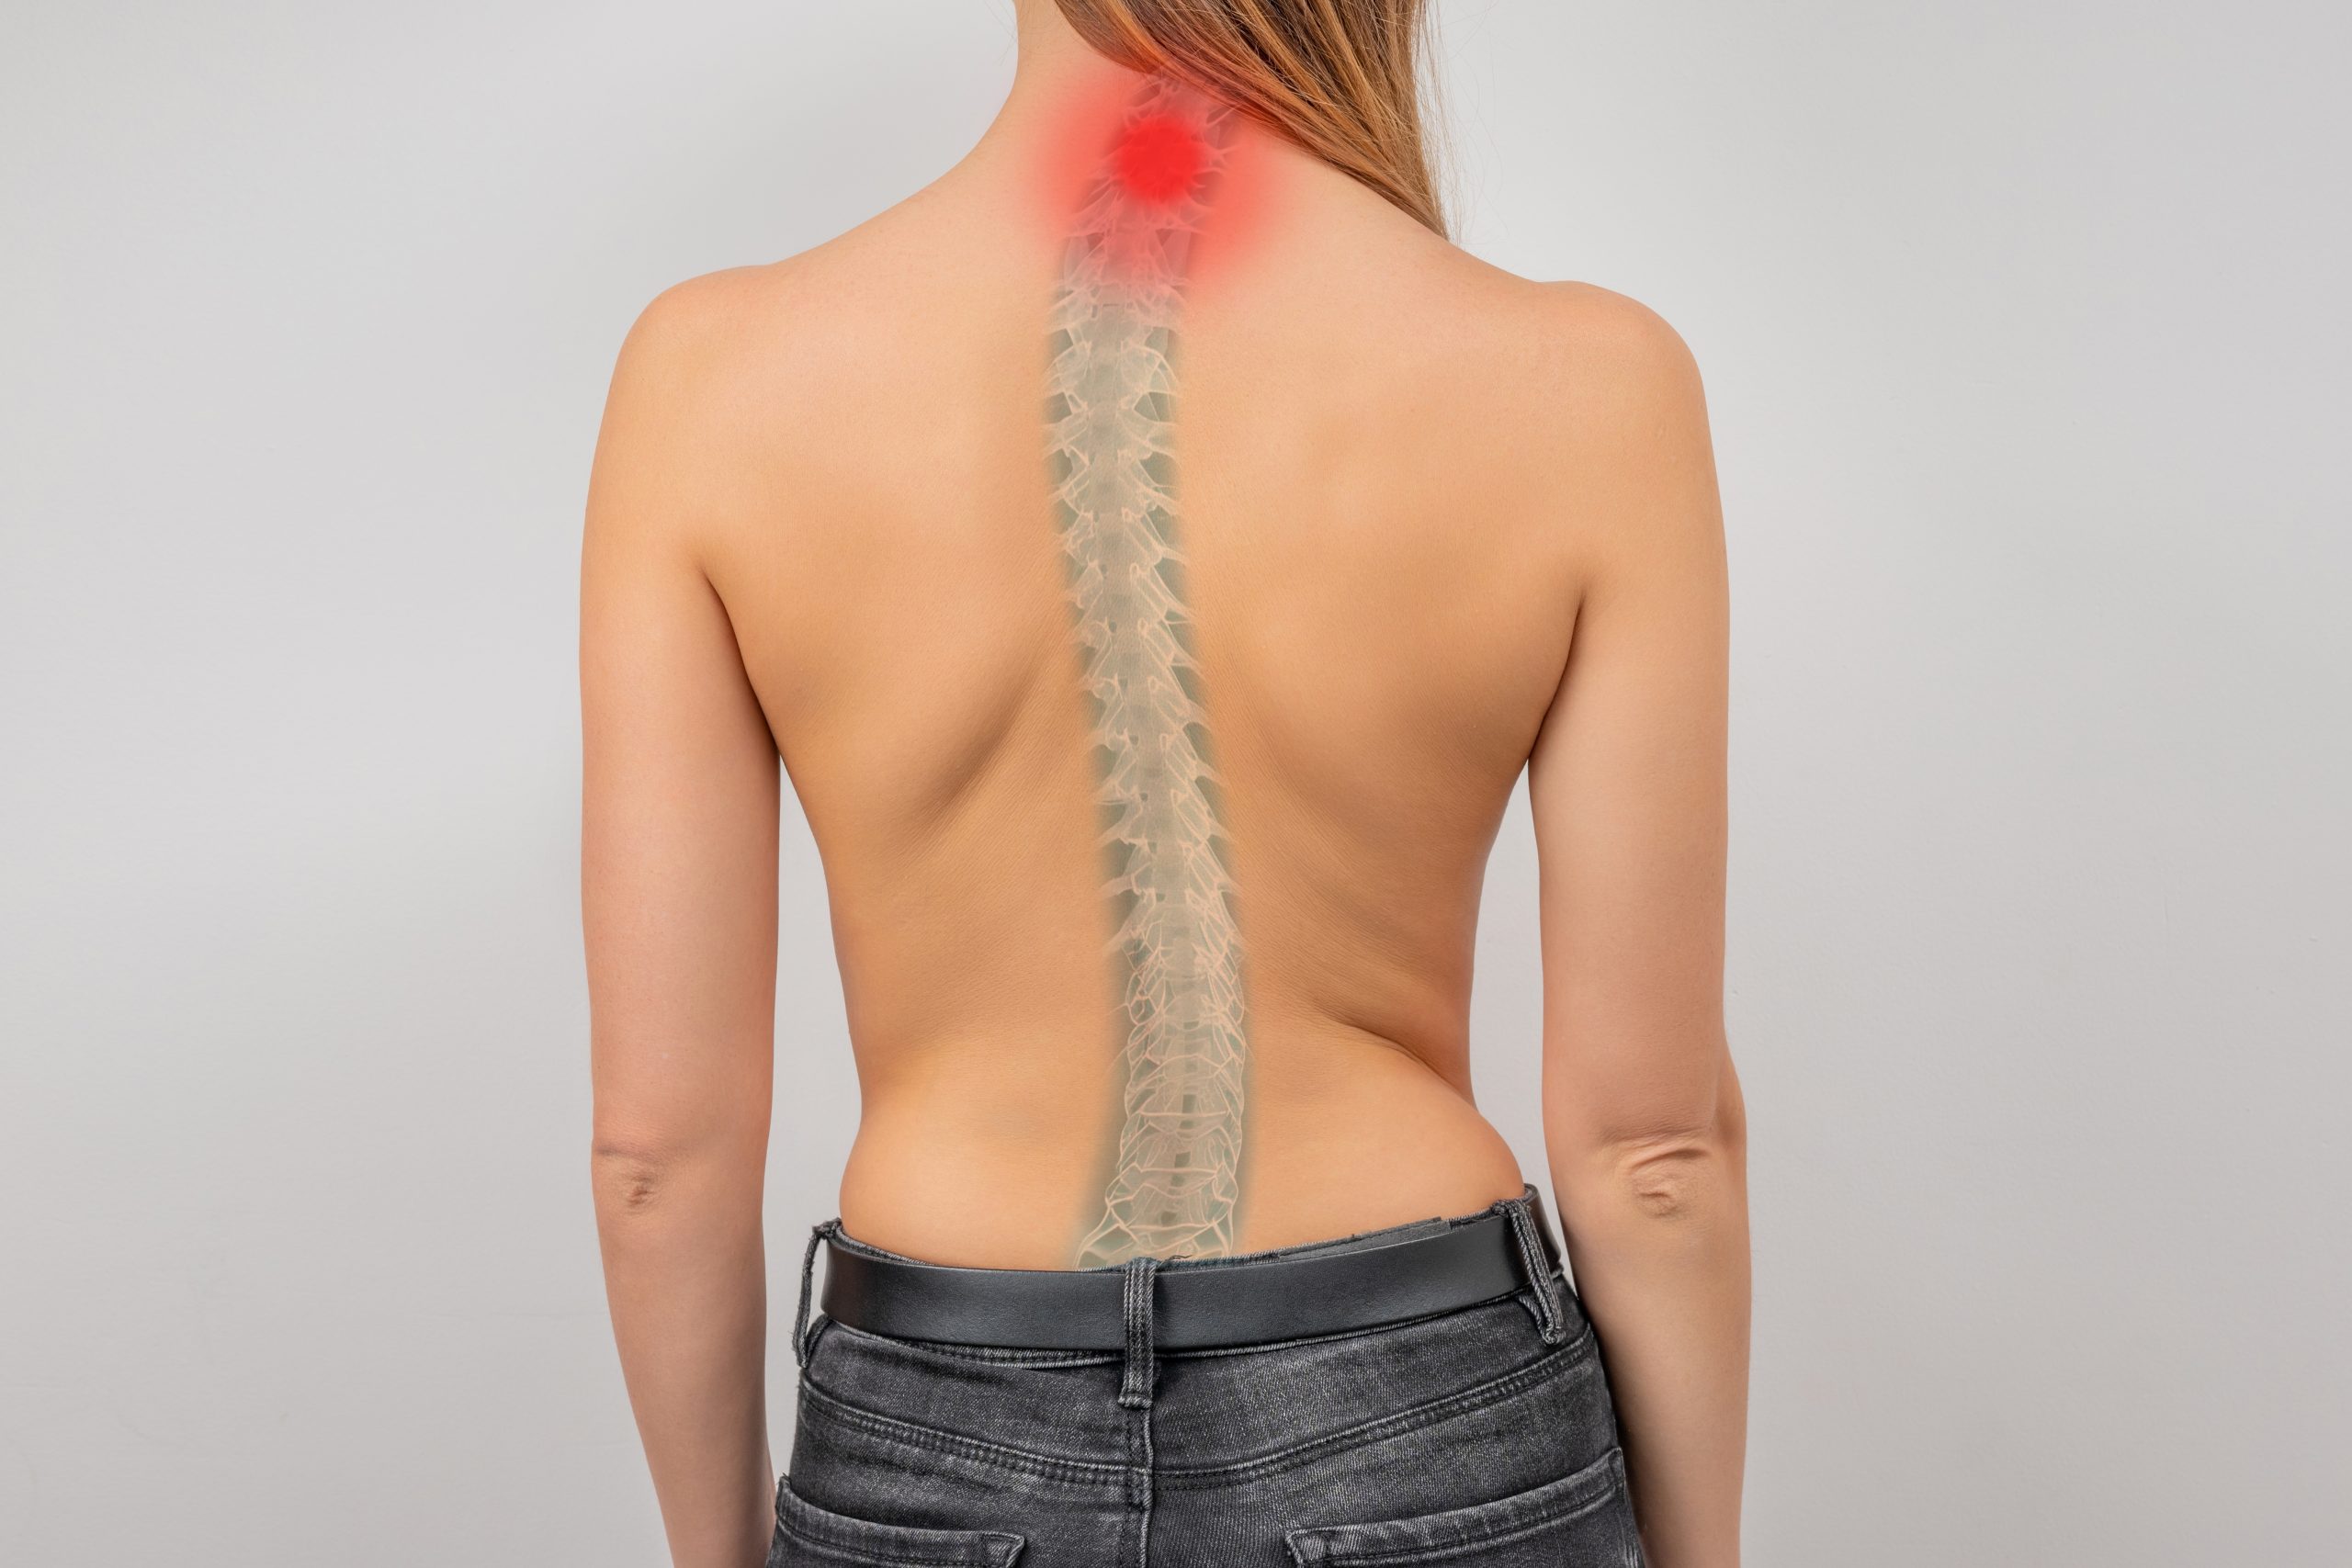 Cervical Lordosis Chiropractic Treatment Near Maltby, WA